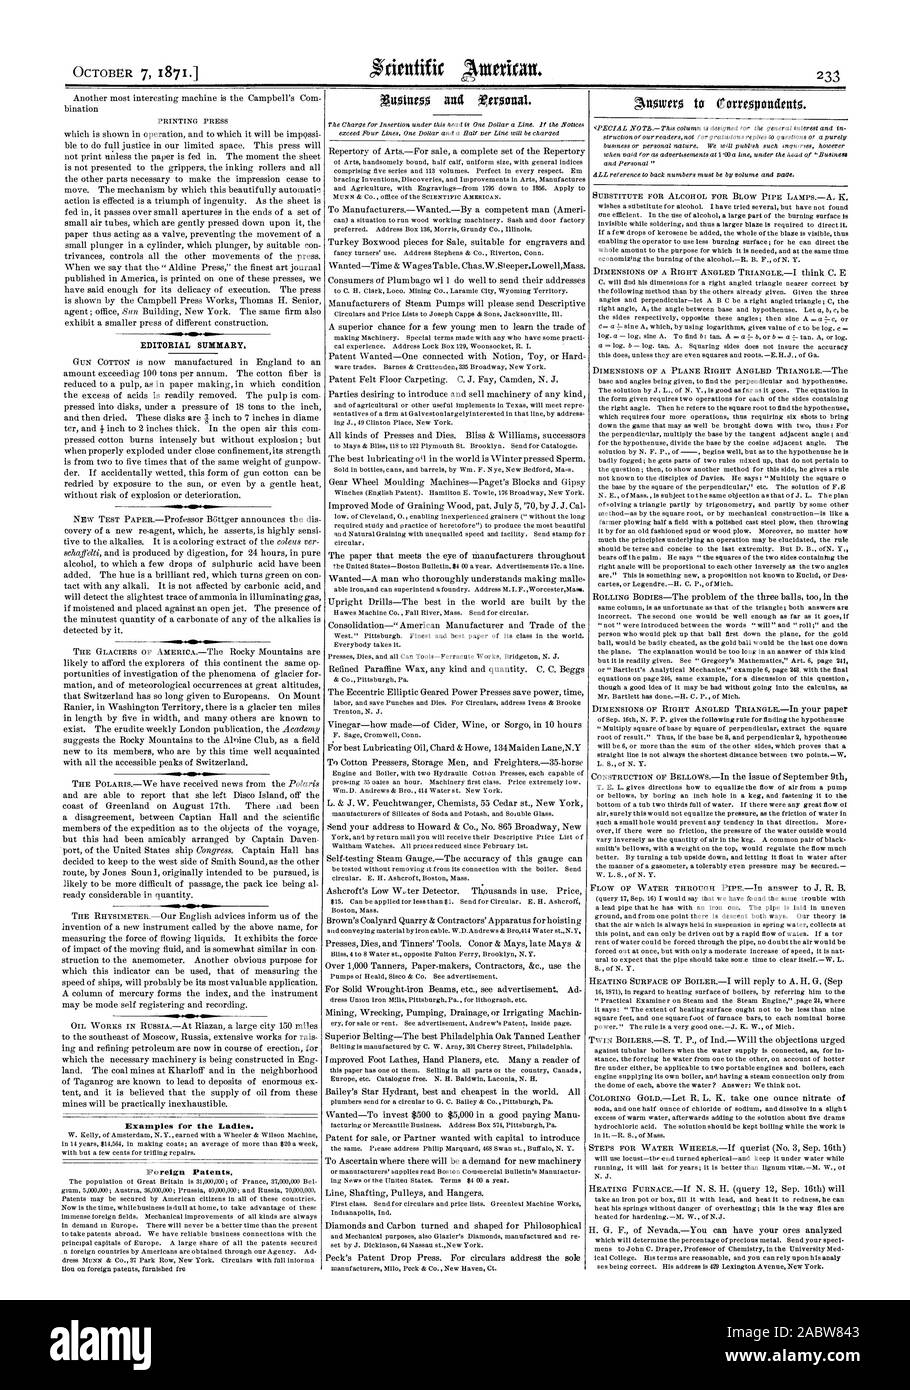 EDITORIAL SUMMARY Examples for the Ladies. Foreign Patents., scientific american, 1871-10-07 Stock Photo